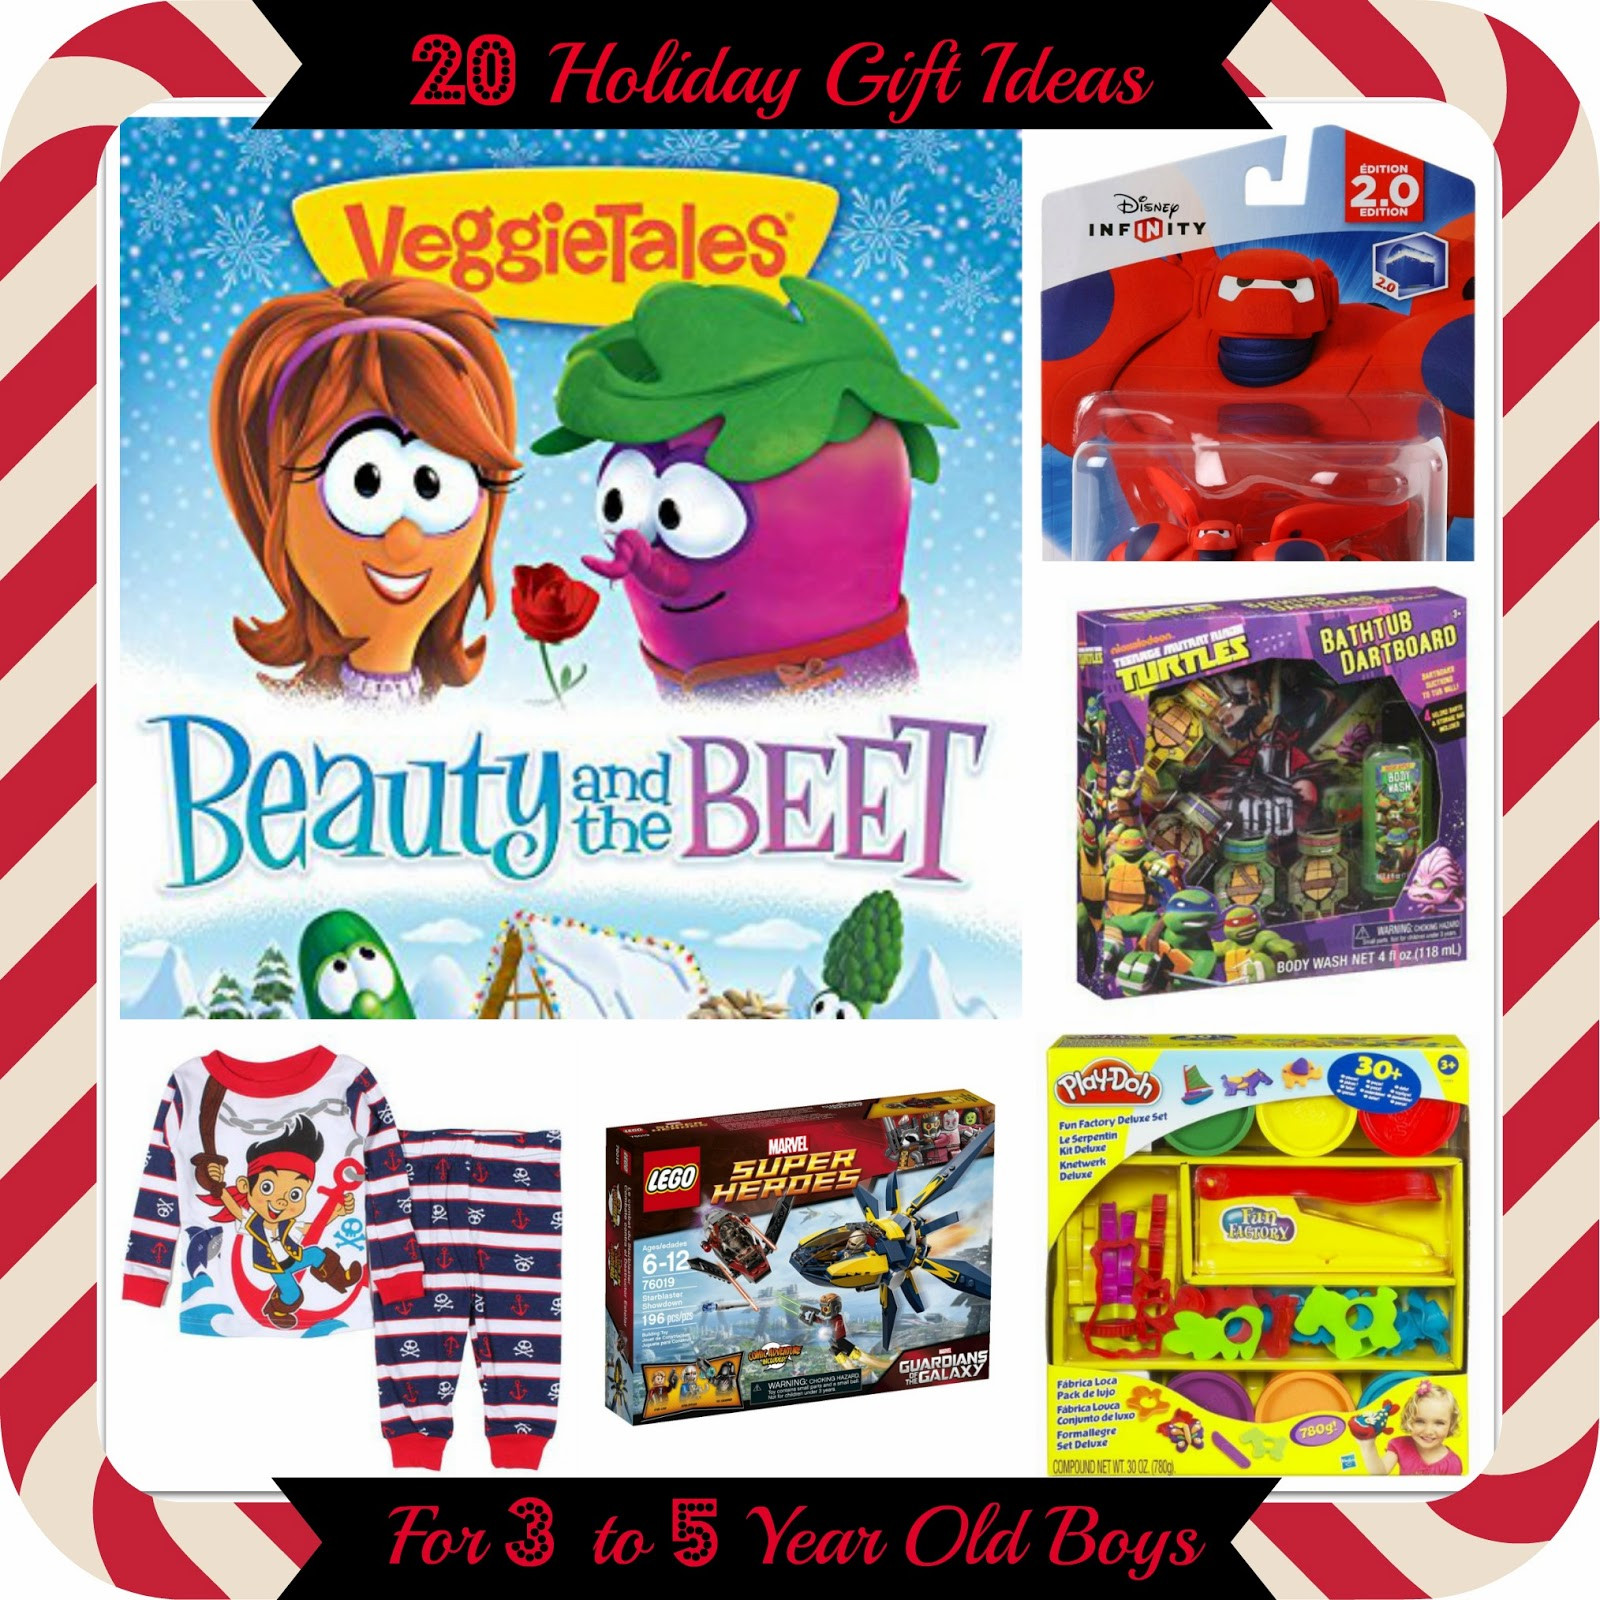 5 Year Old Christmas Gift Ideas
 Raising Samuels Life 20 Holiday Gift Ideas for 3 5 Year